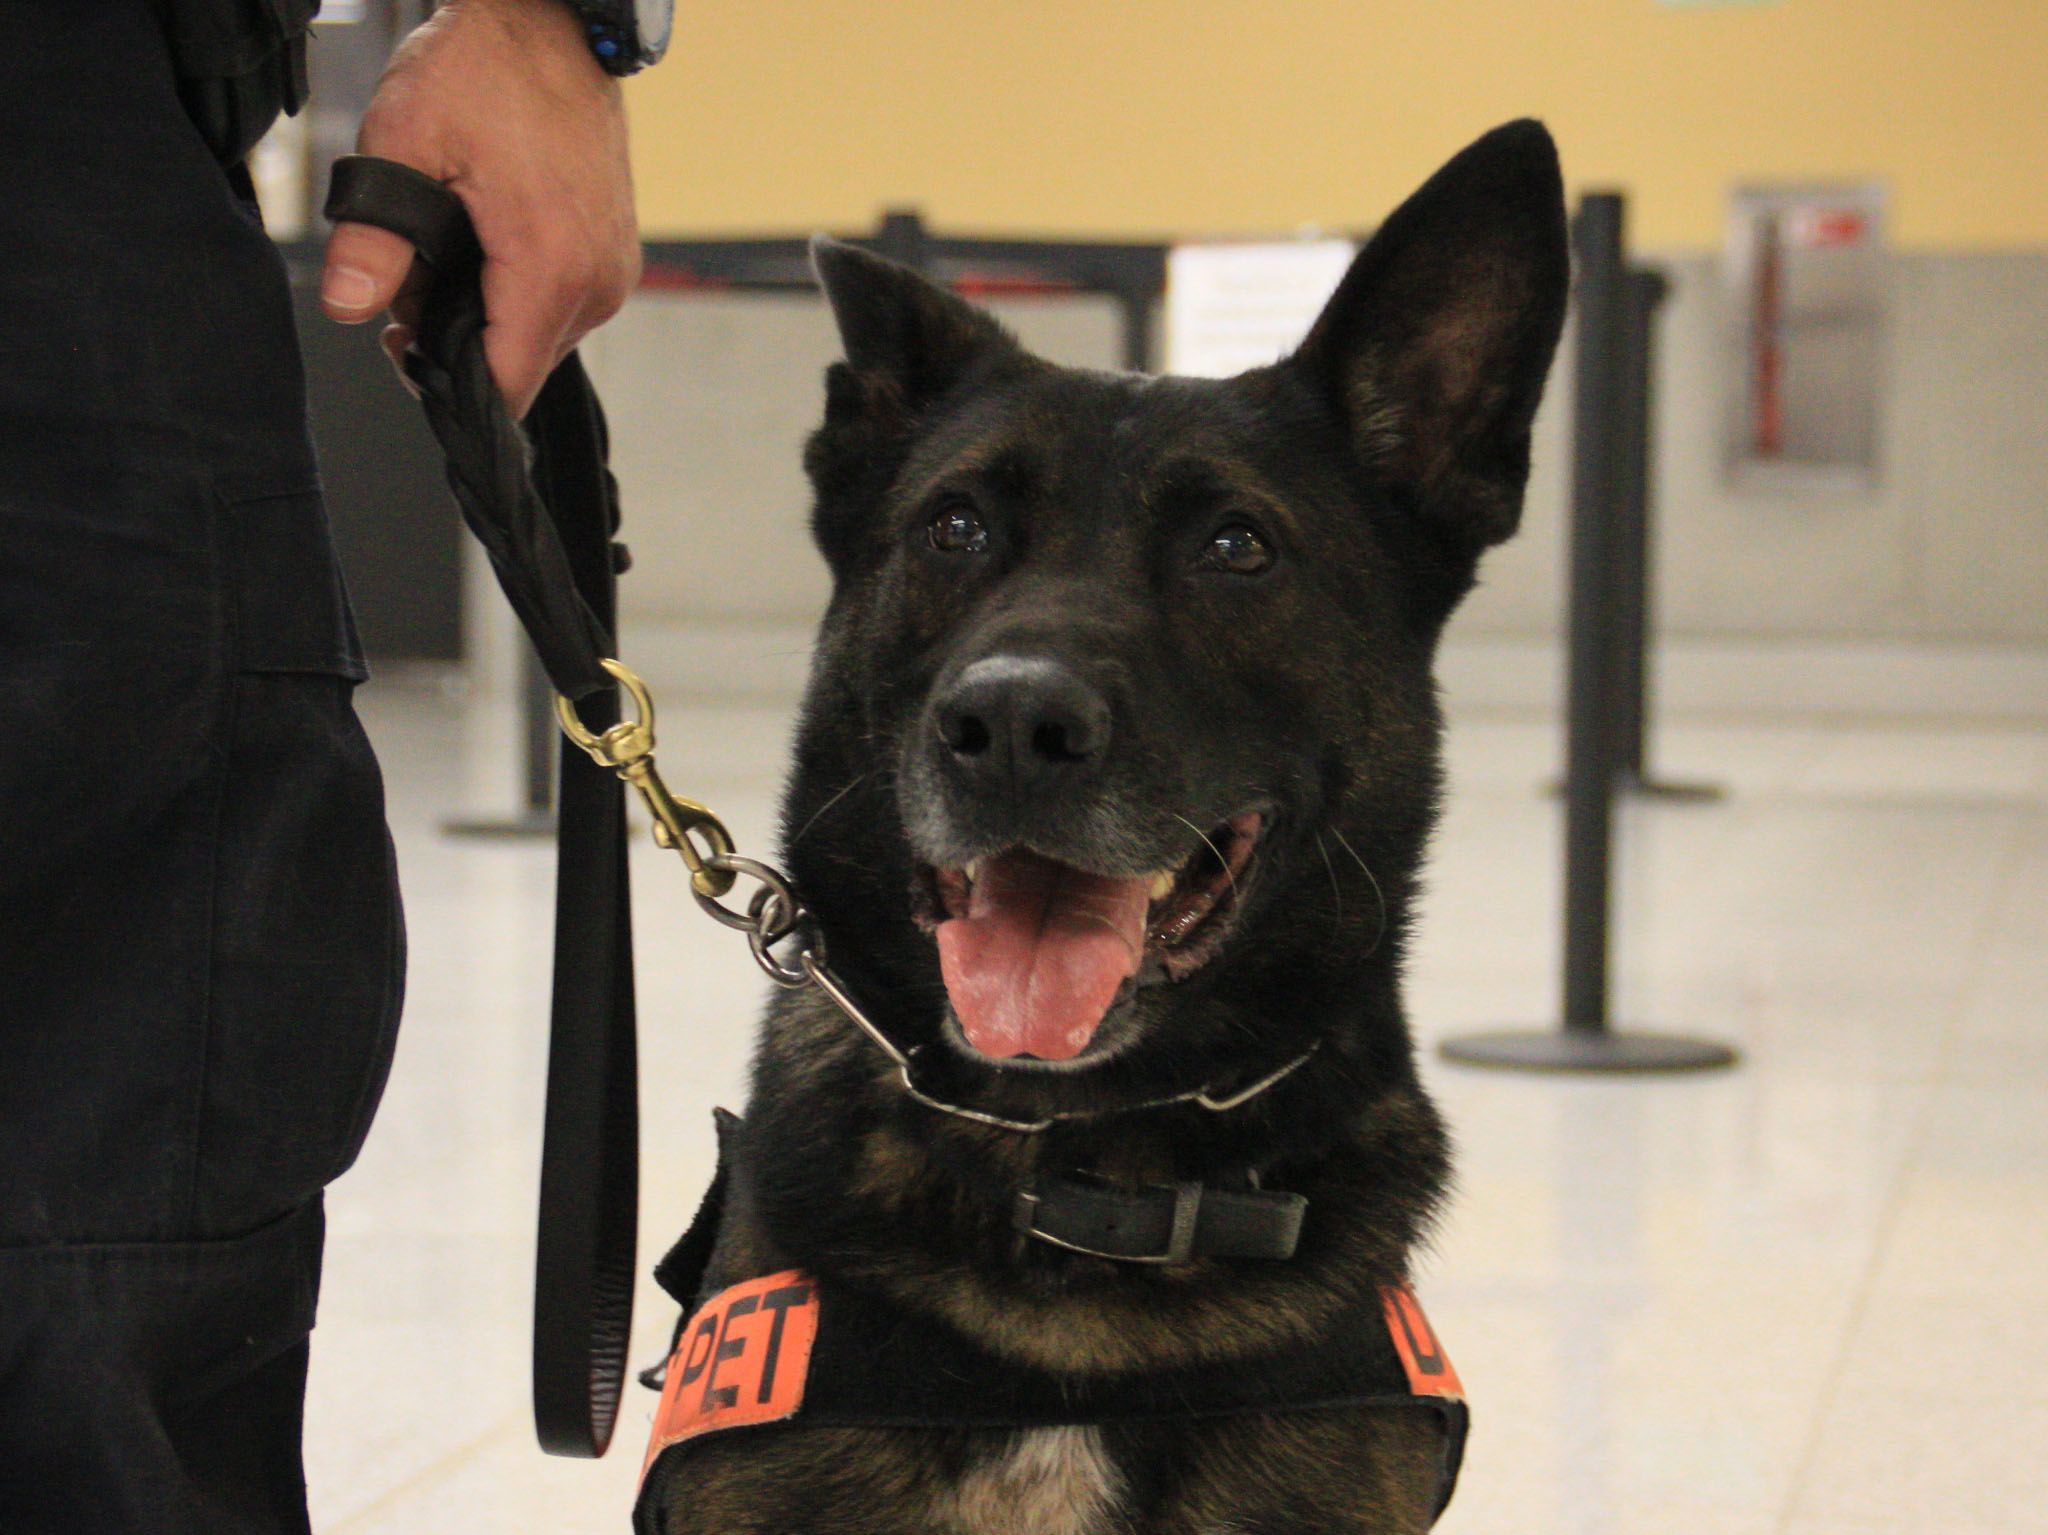 K9 Jax the dog. This image is from To Catch A Smuggler [Photo of the day - March 2021]